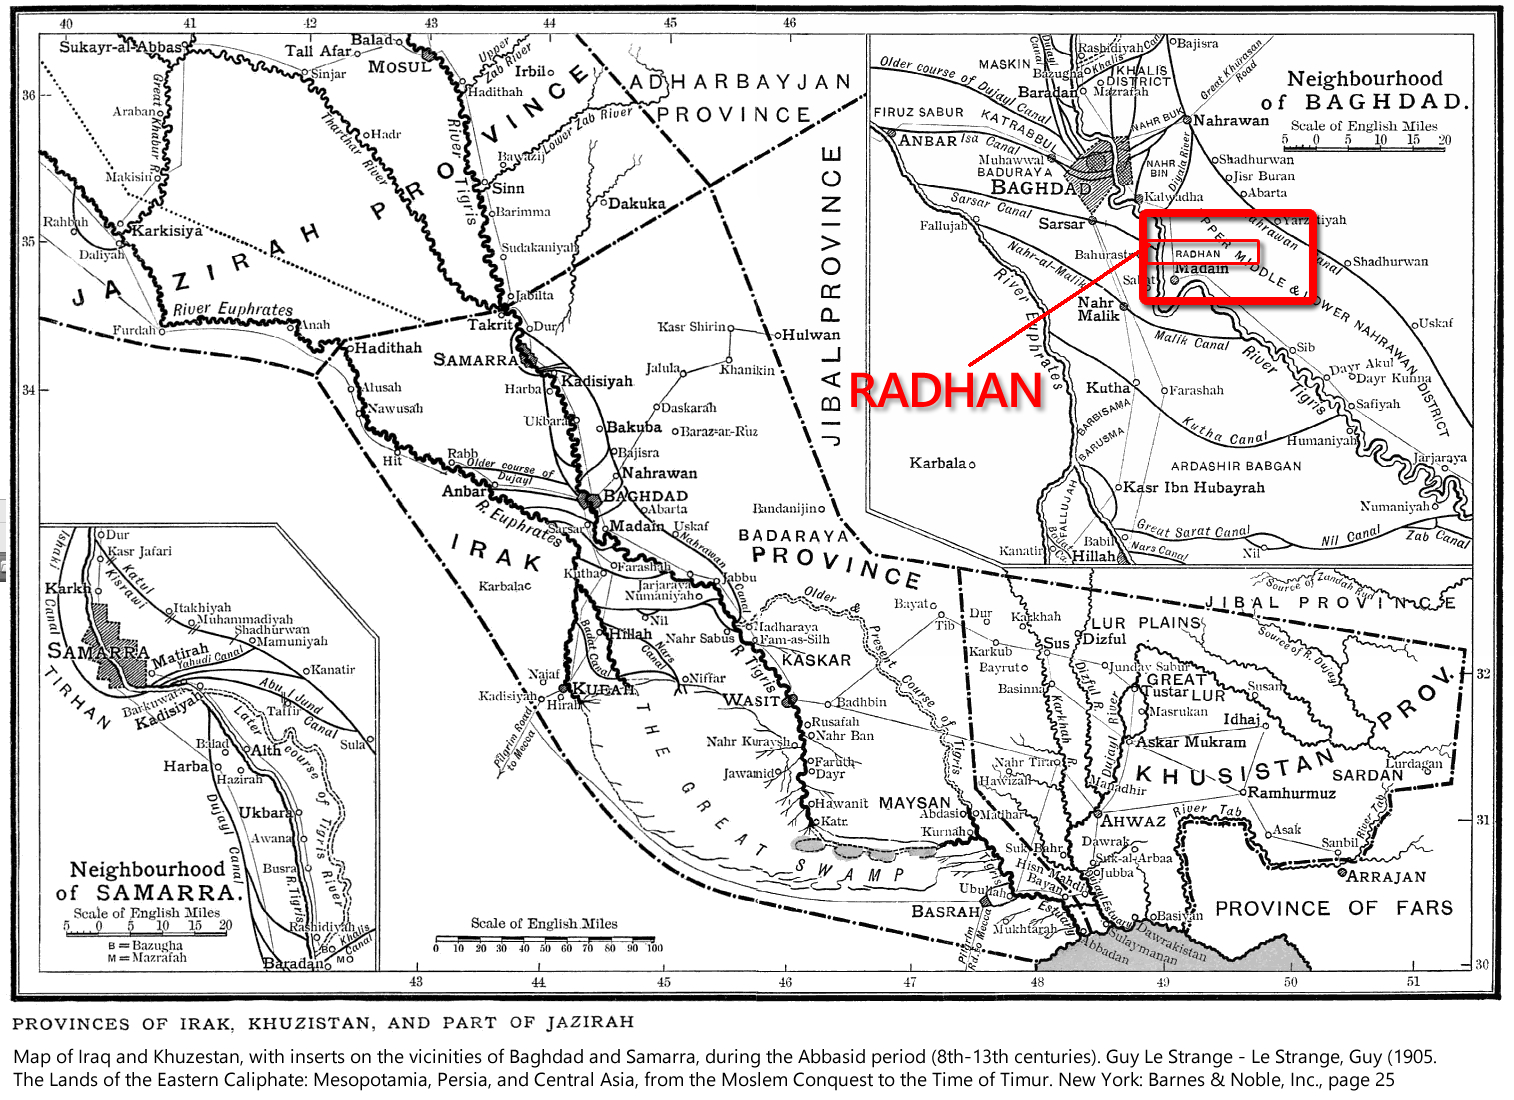 Map of Iraq and Khuzestan, with inserts on the vicinities of Baghdad and Samarra, during the Abbasid period (8th-13th centuries). Guy Le Strange - Le Strange, Guy (1905. The Lands of the Eastern Caliphate: Mesopotamia, Persia, and Central Asia, from the Moslem Conquest to the Time of Timur. New York: Barnes & Noble, Inc., page 25.